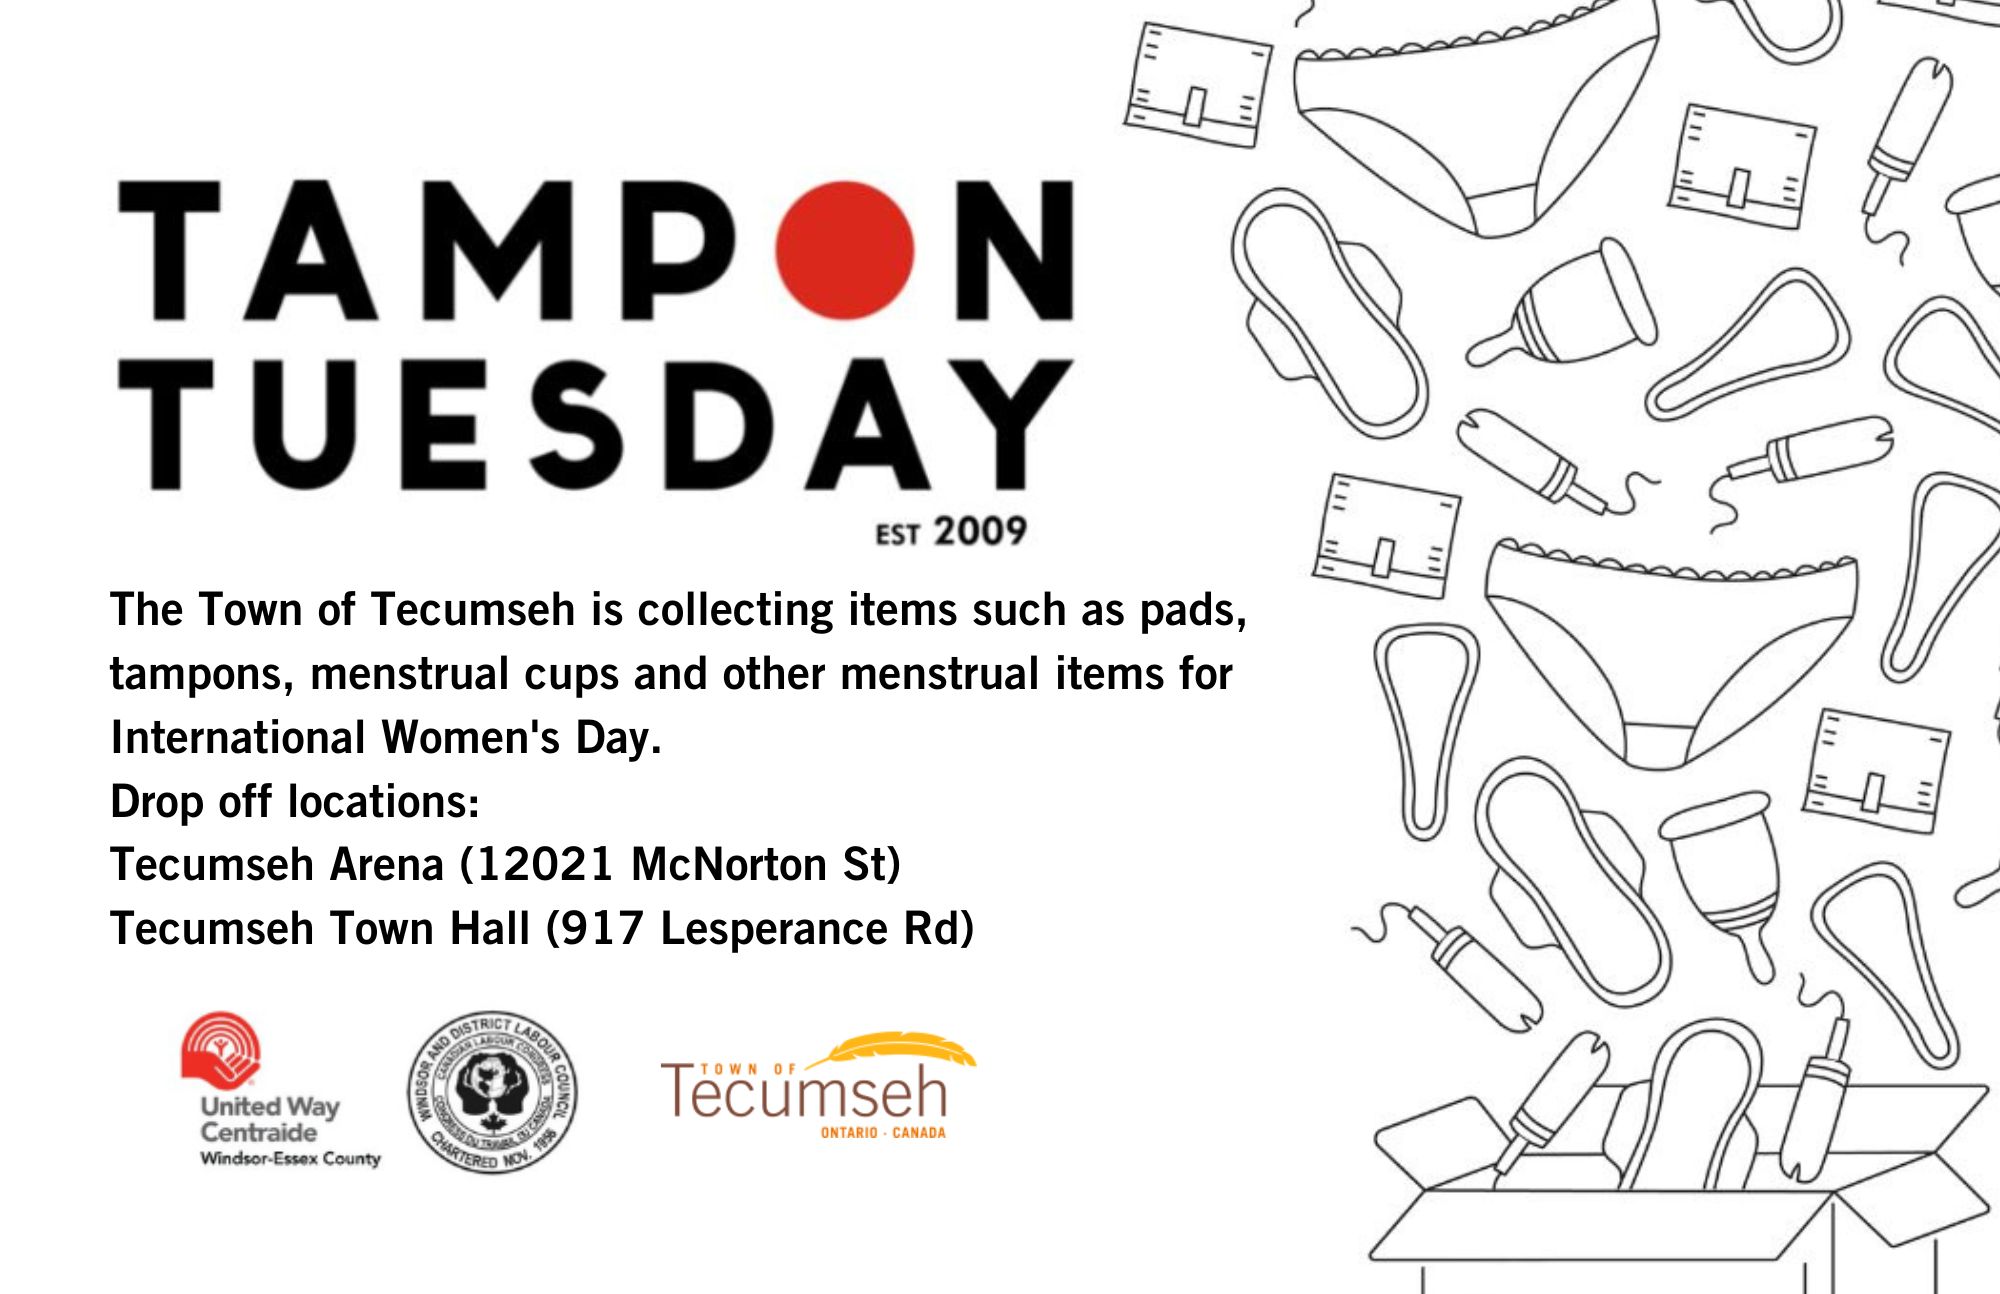 tampon tuesday poster 